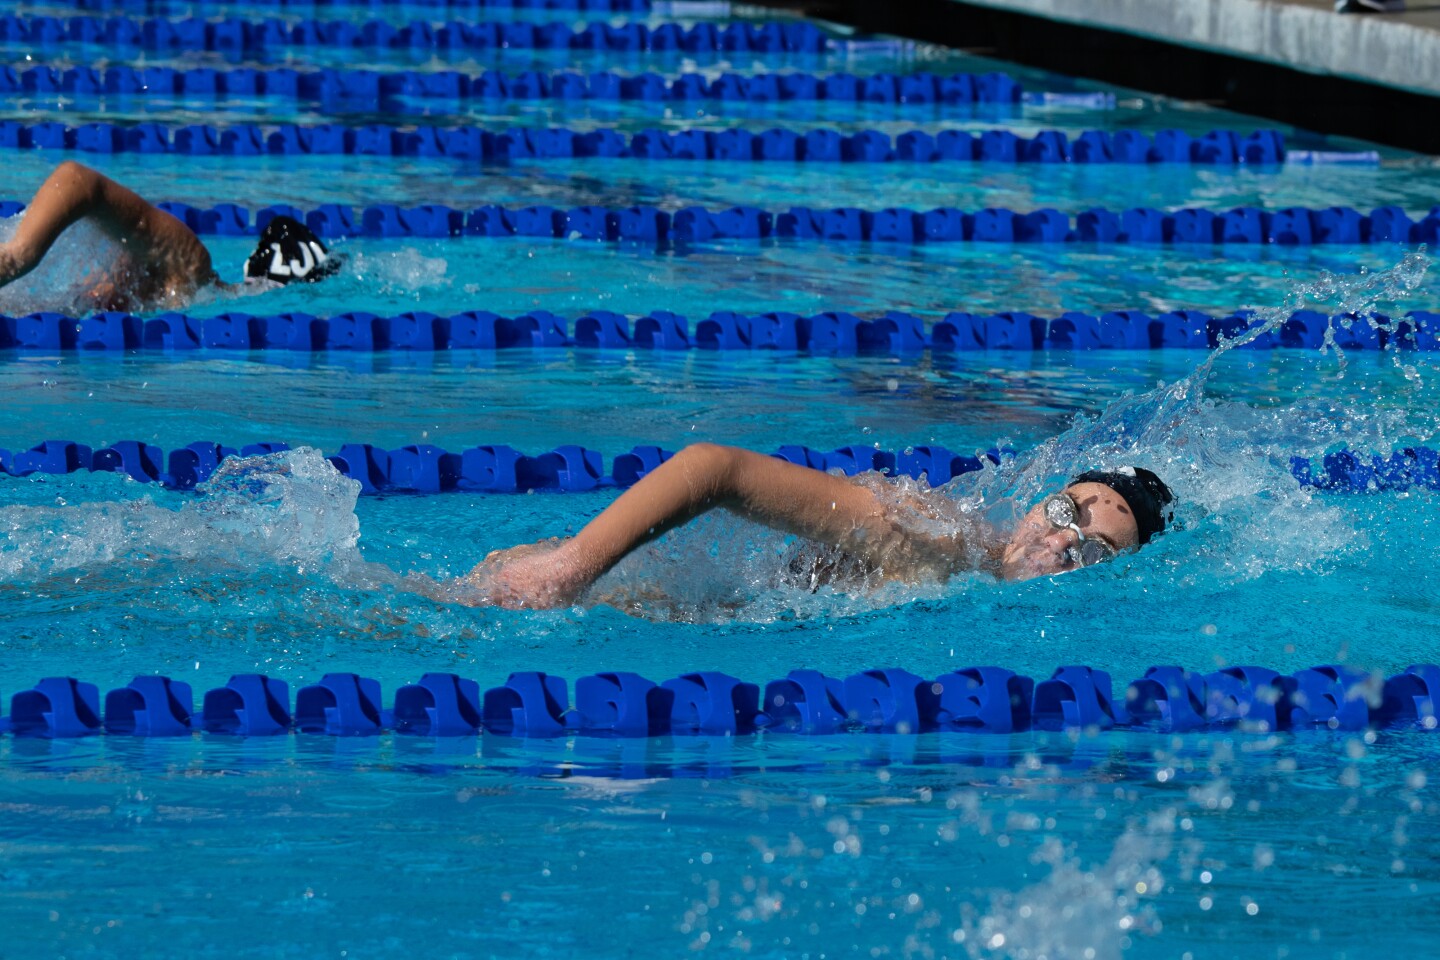 La Jolla High's Roxy Hazuka swims in the 100-meter freestyle March 20 against Academy of Our Lady of Peace of San Diego.